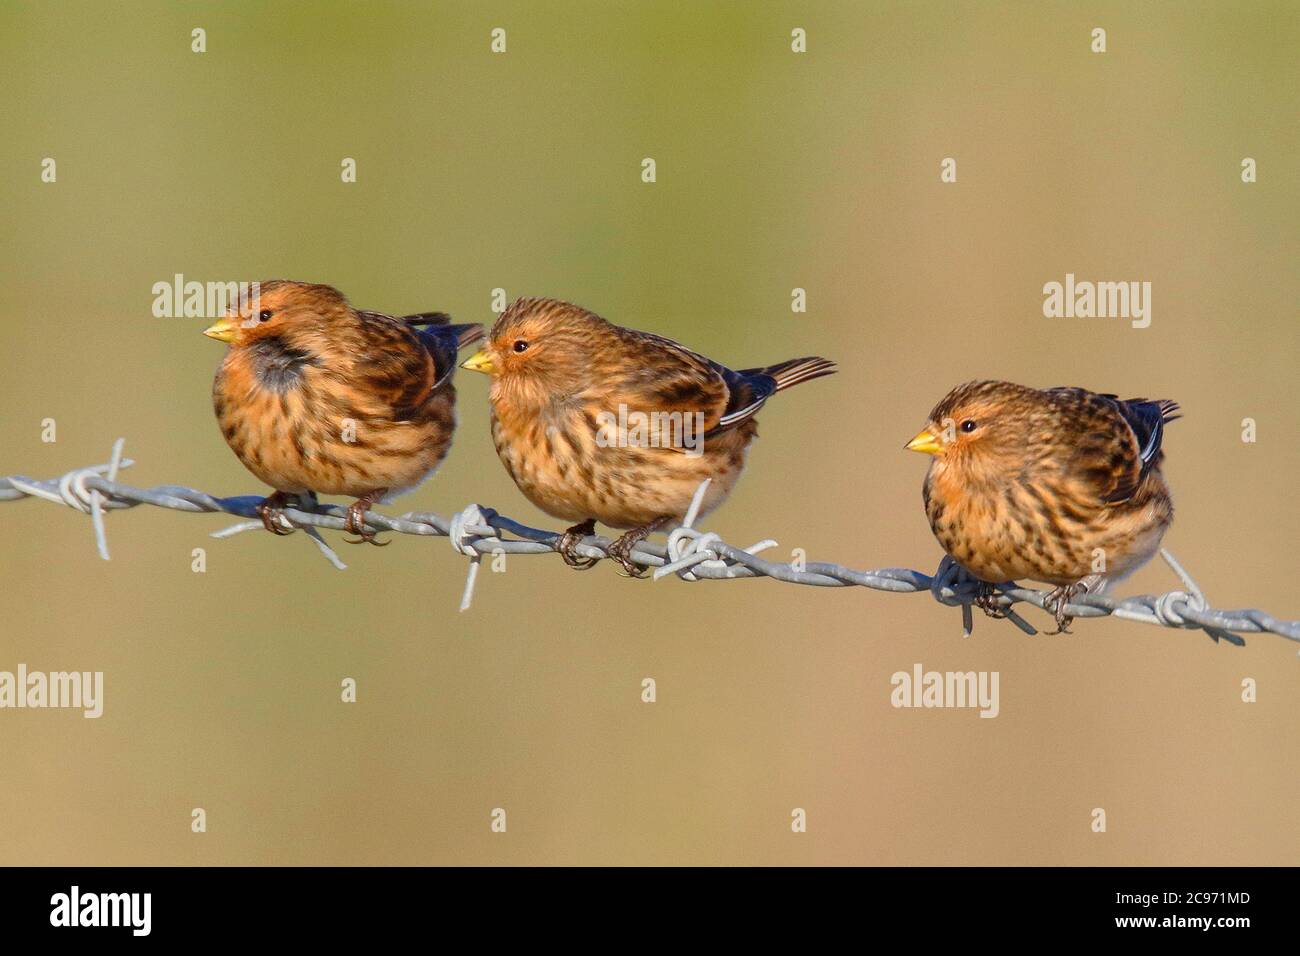 British twite (Carduelis flavirostris pipilans, Carduelis pipilans), three adult birds perching side by side on a barbwire fence, United Kingdom, England, Norfolk Stock Photo